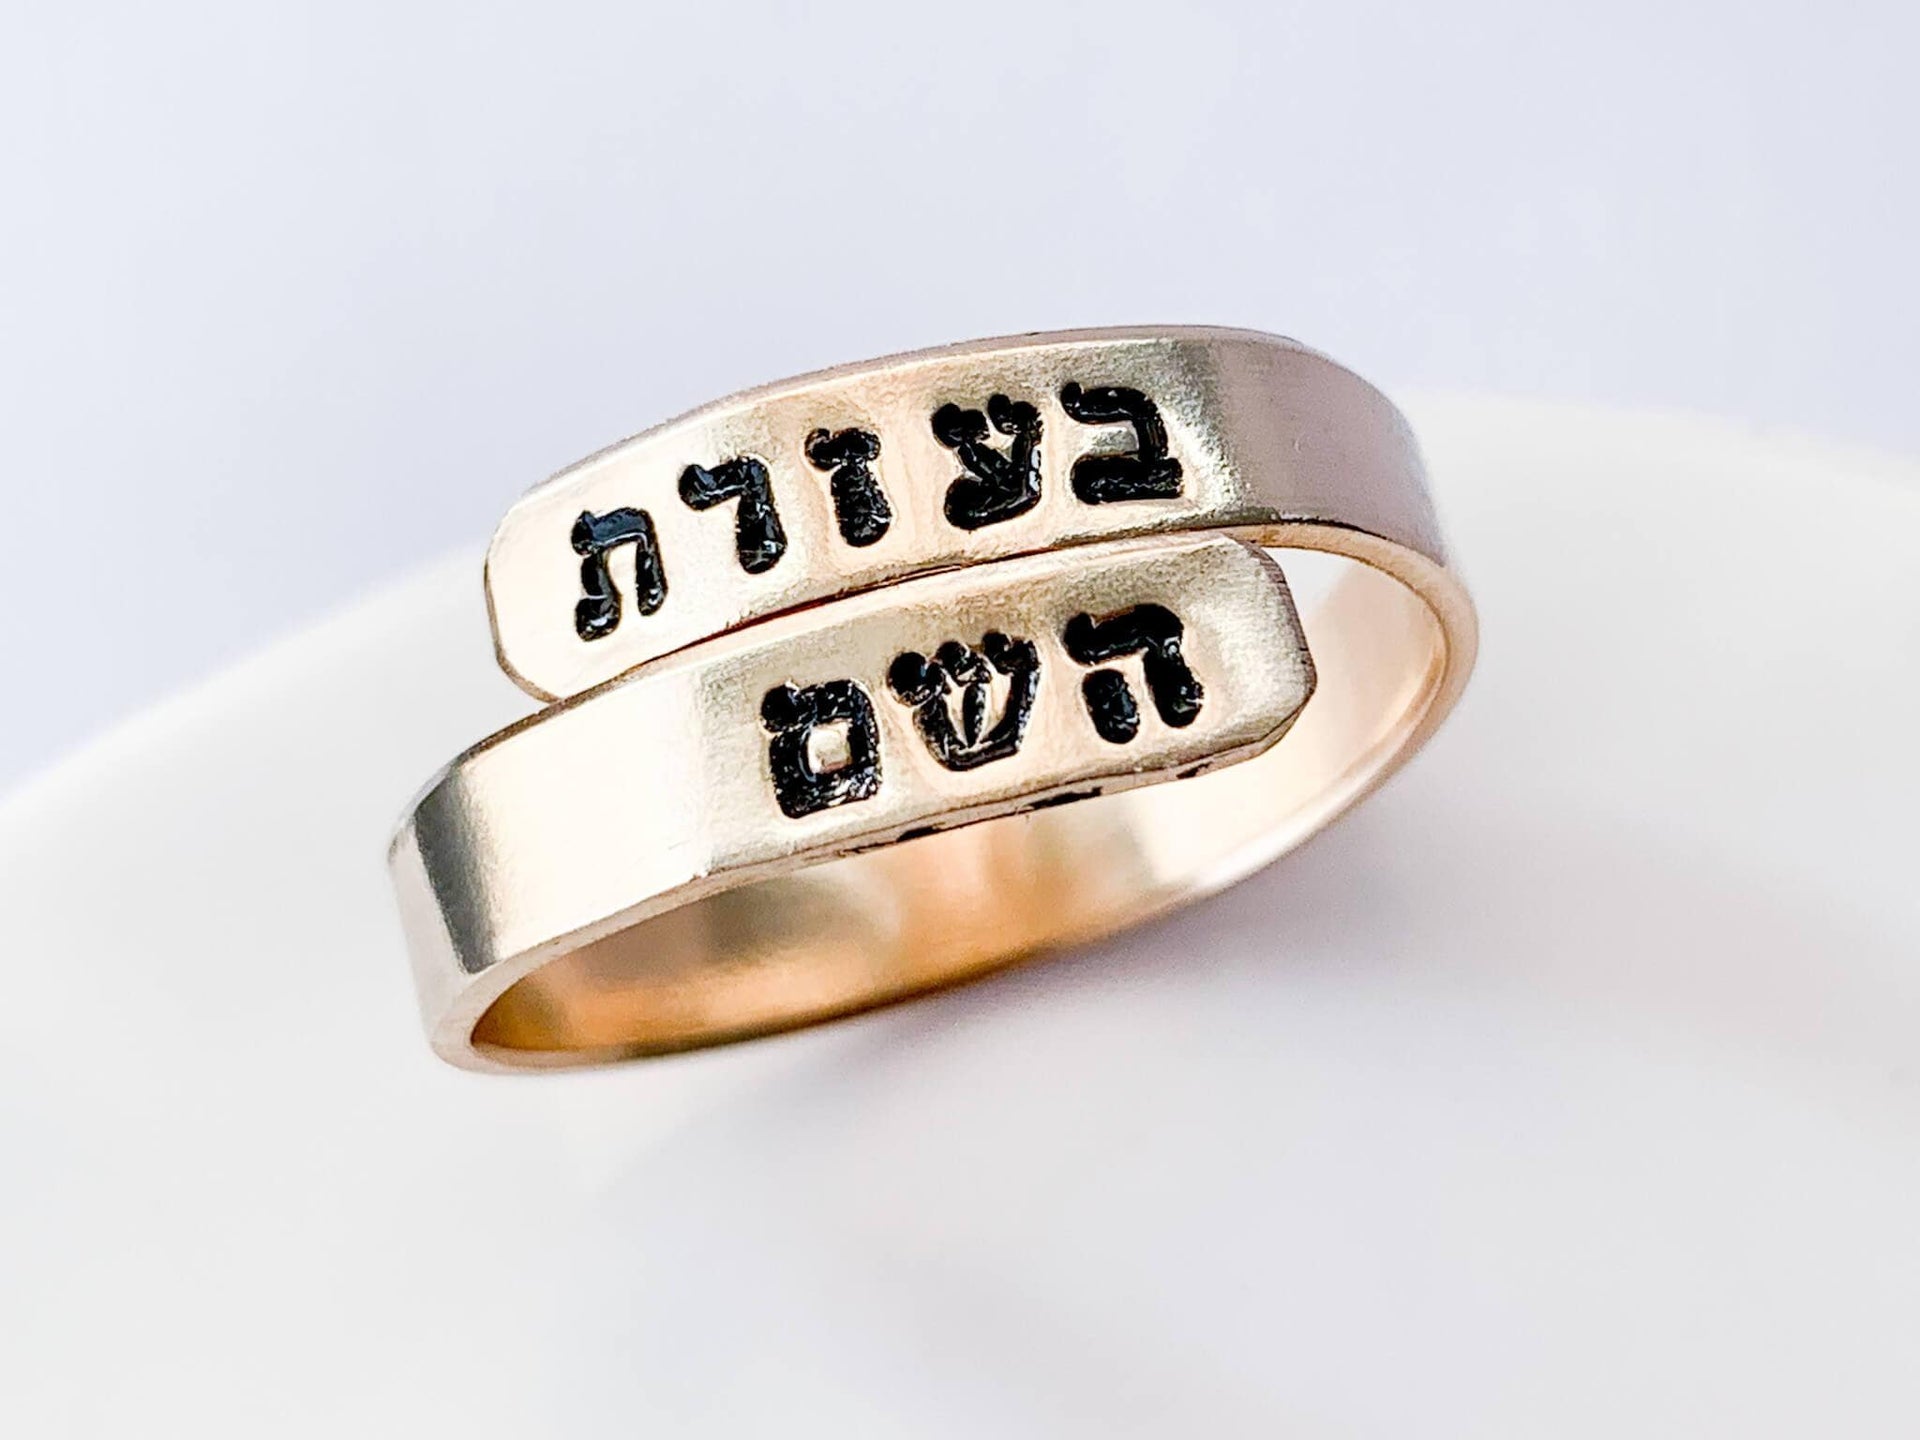 Everything Beautiful Rings Gold-Filled With the Help of Hashem Wrap Ring - Gold, Rose Gold or Sterling Silver